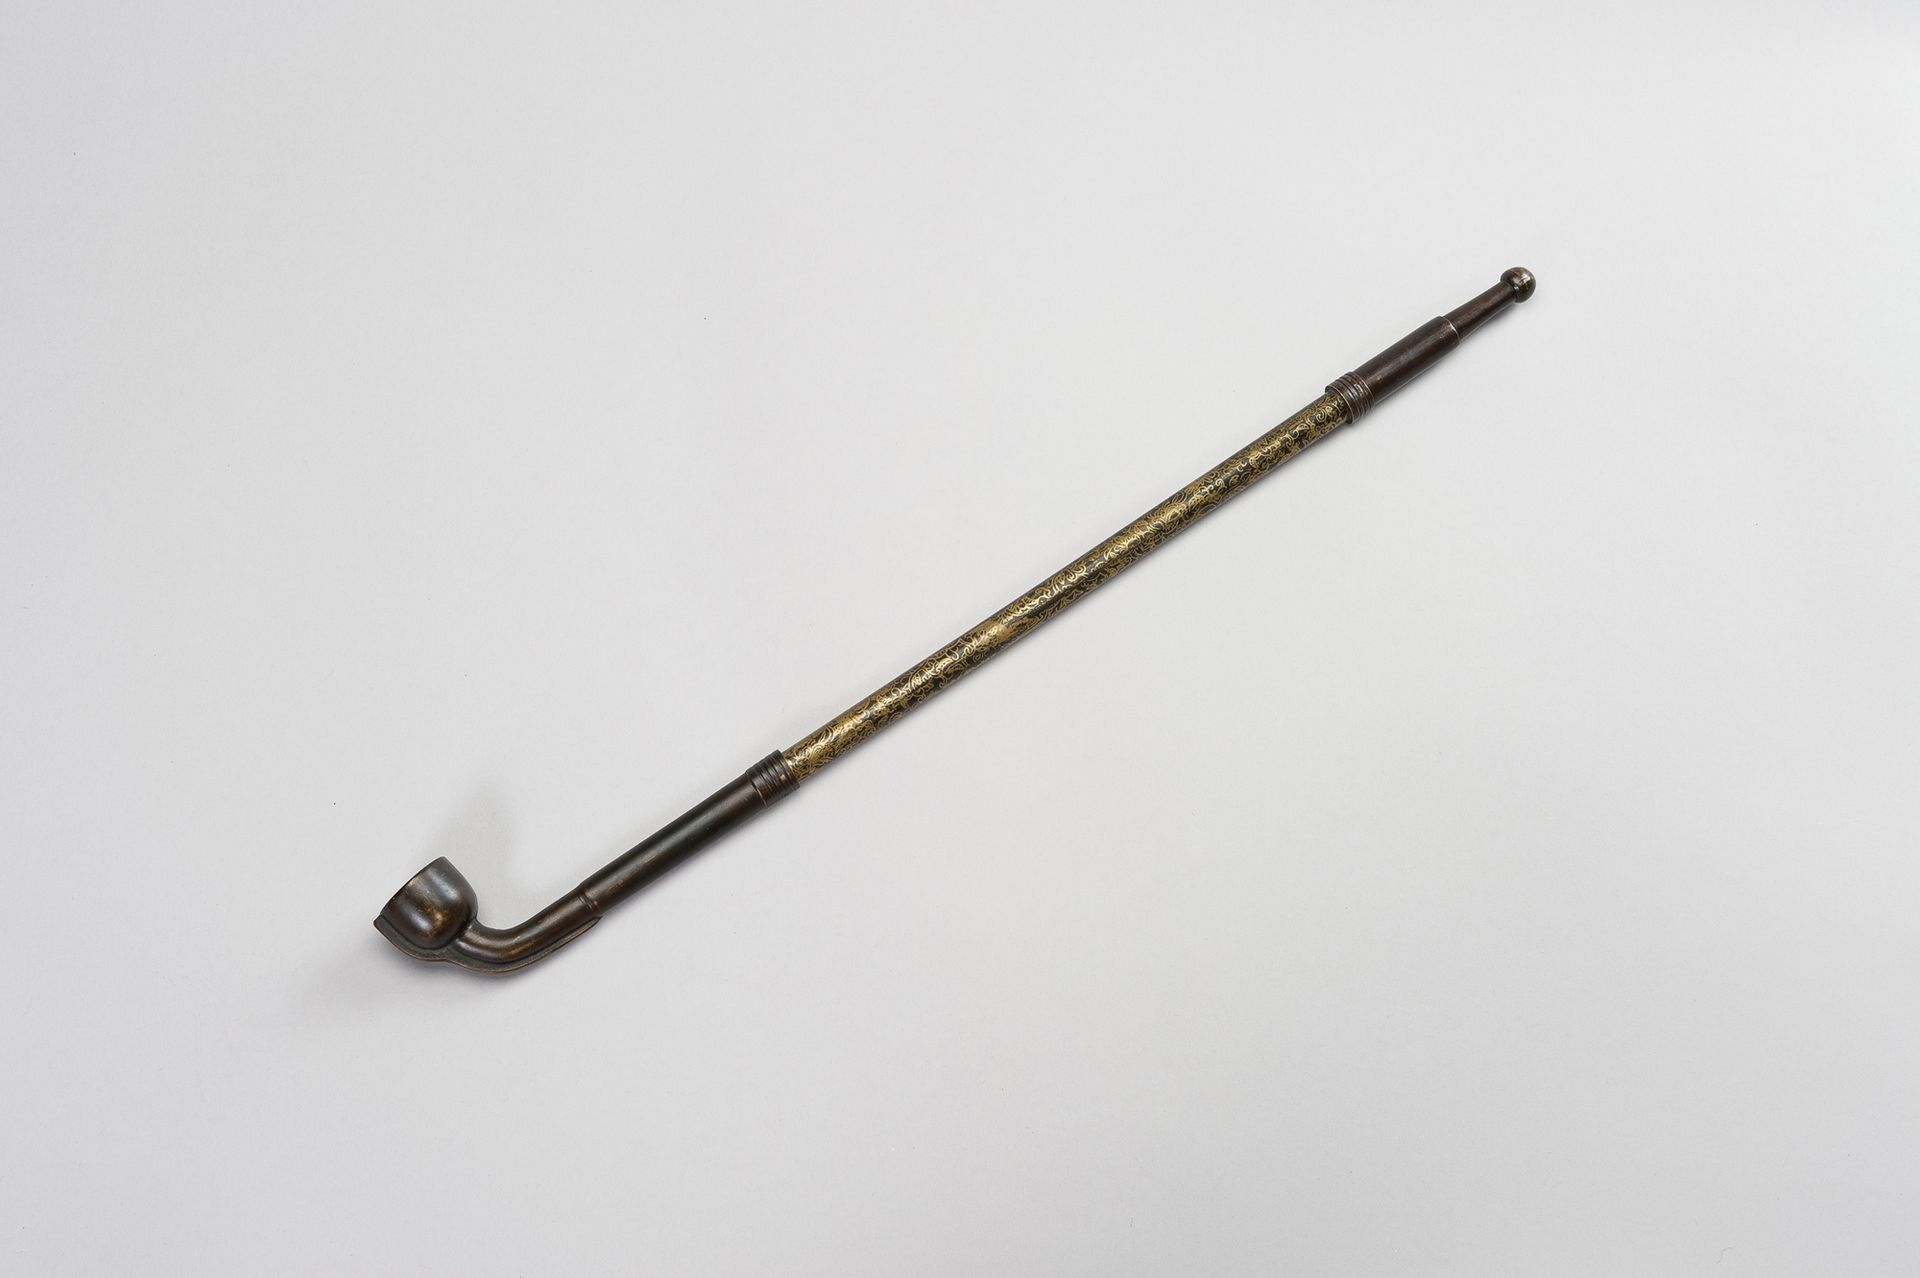 A RARE EXTENDABLE BRONZE OPIUM PIPE, XIANFENG MARK AND PERIOD 罕见的可延长的铜制鸦片烟斗，咸丰标记&hellip;